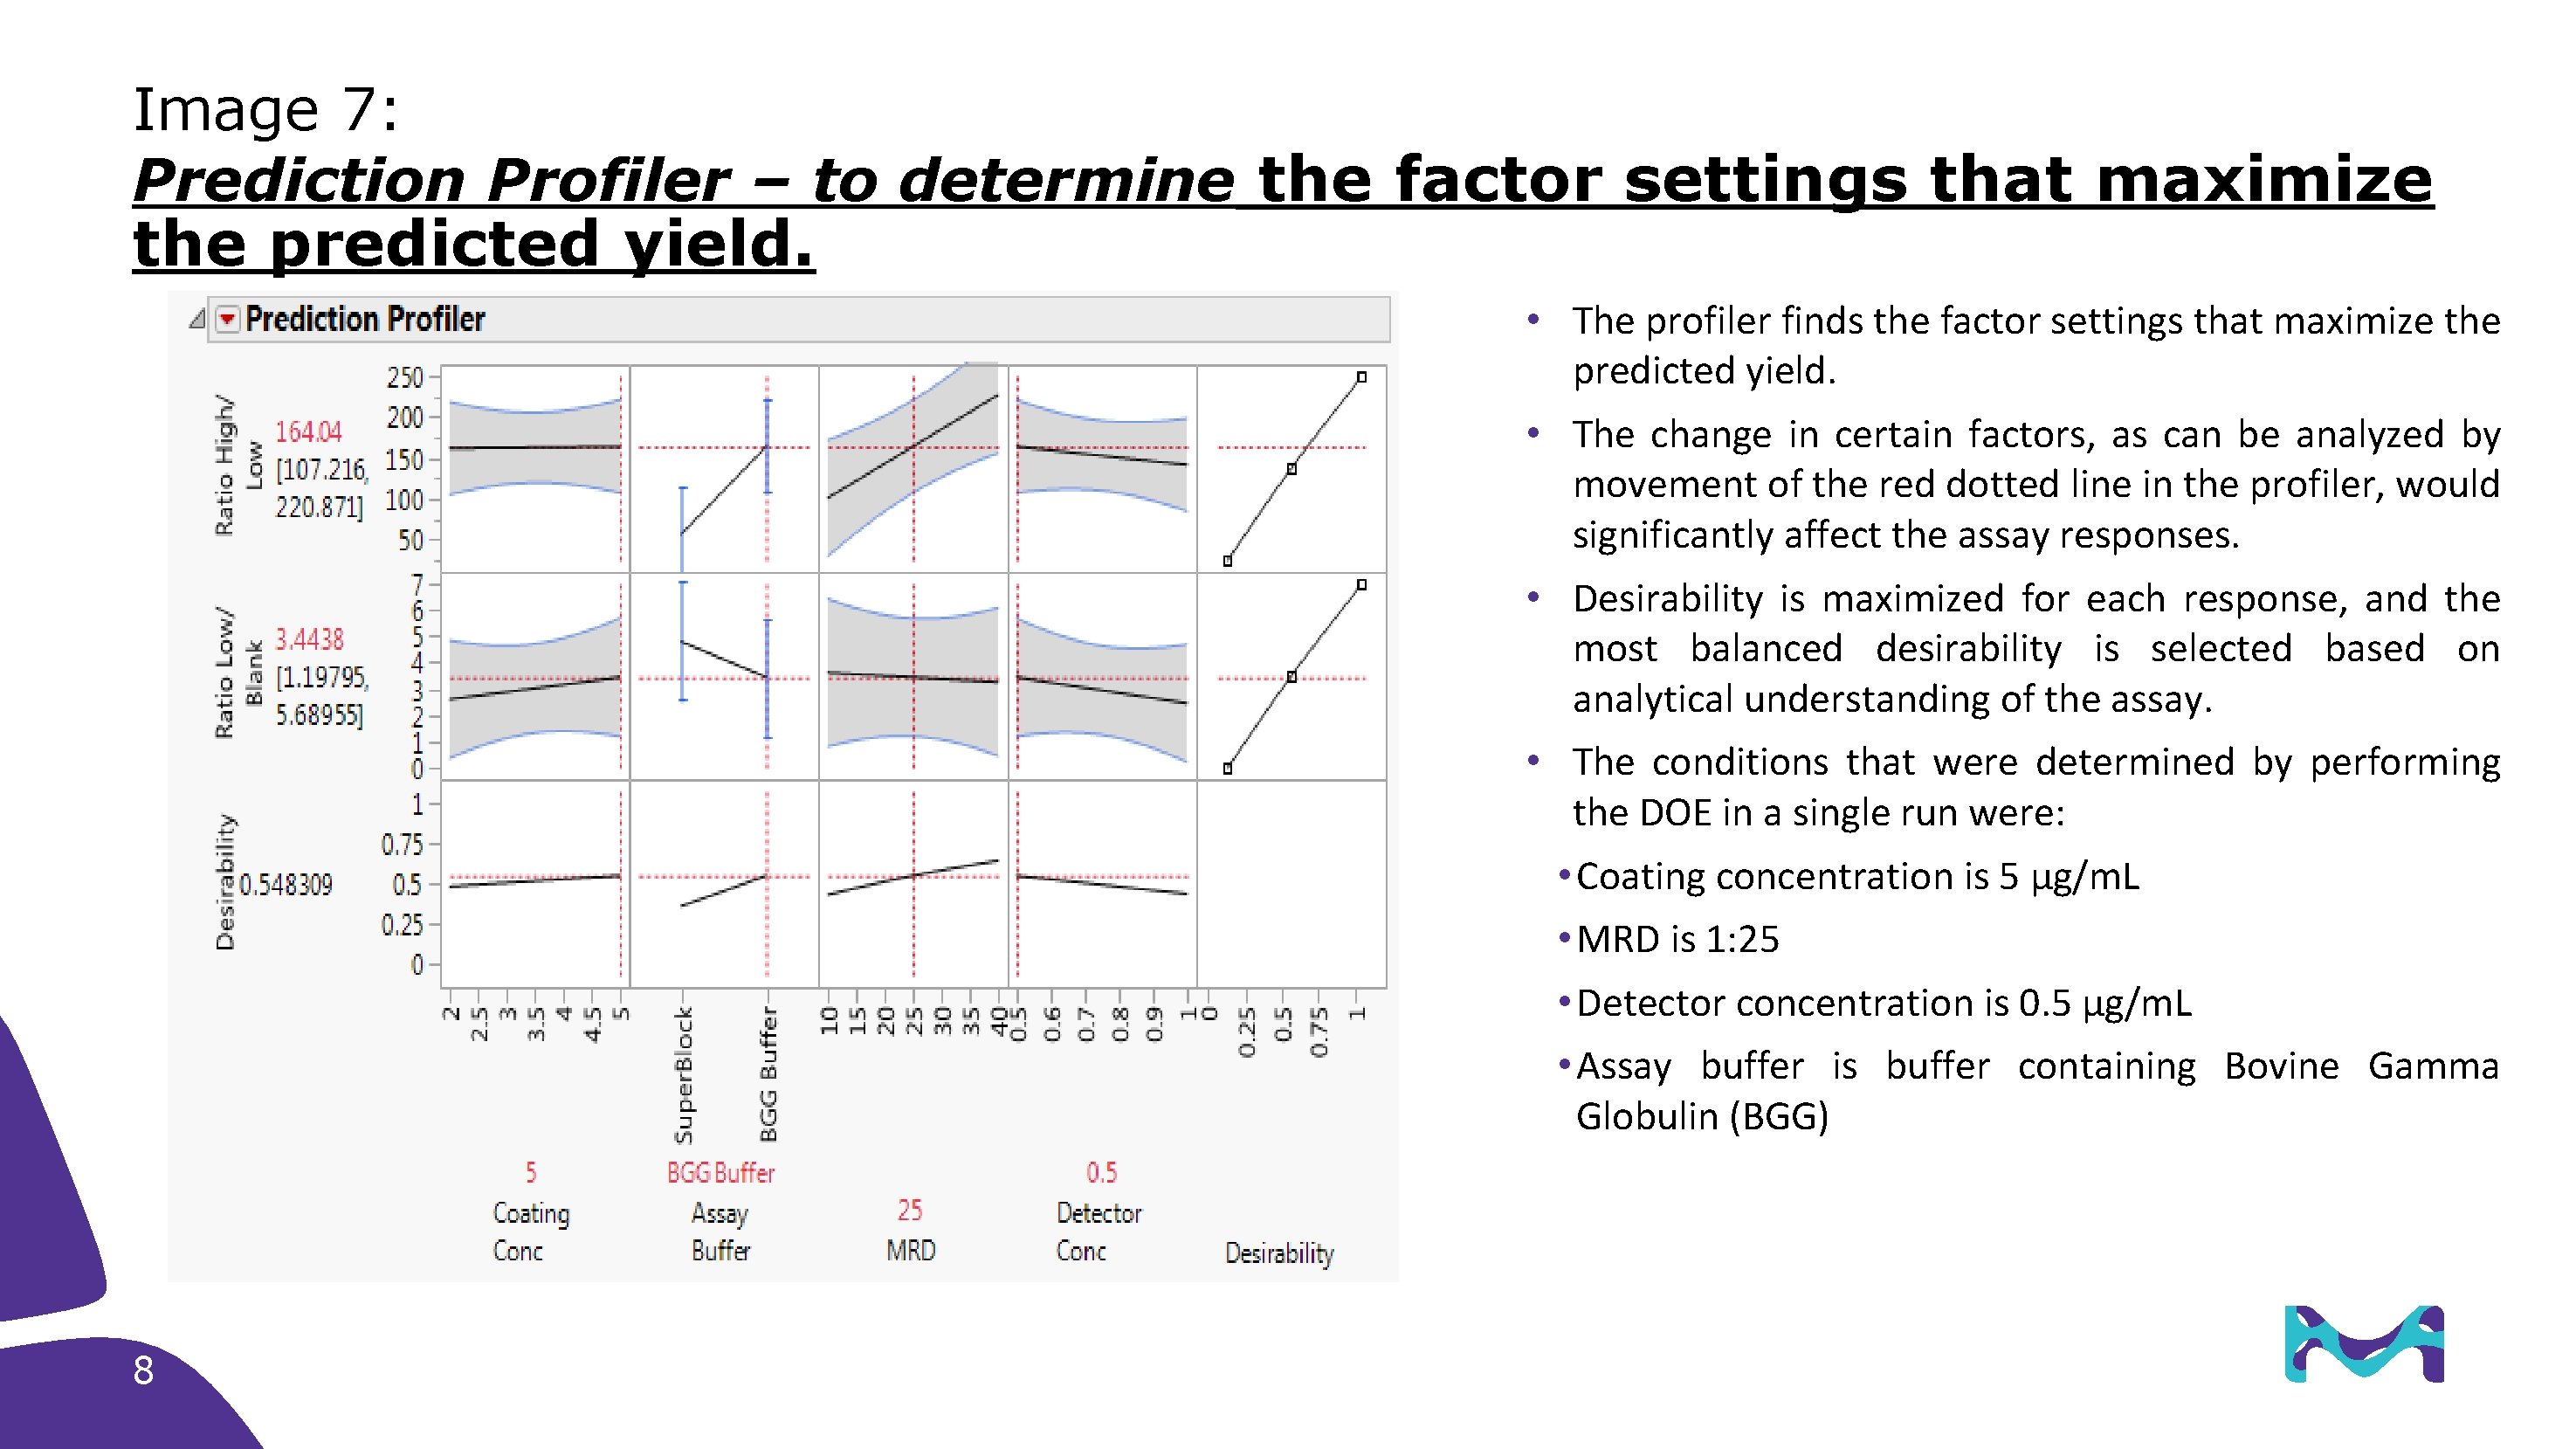 Image 7: Prediction Profiler – to determine the factor settings that maximize the predicted